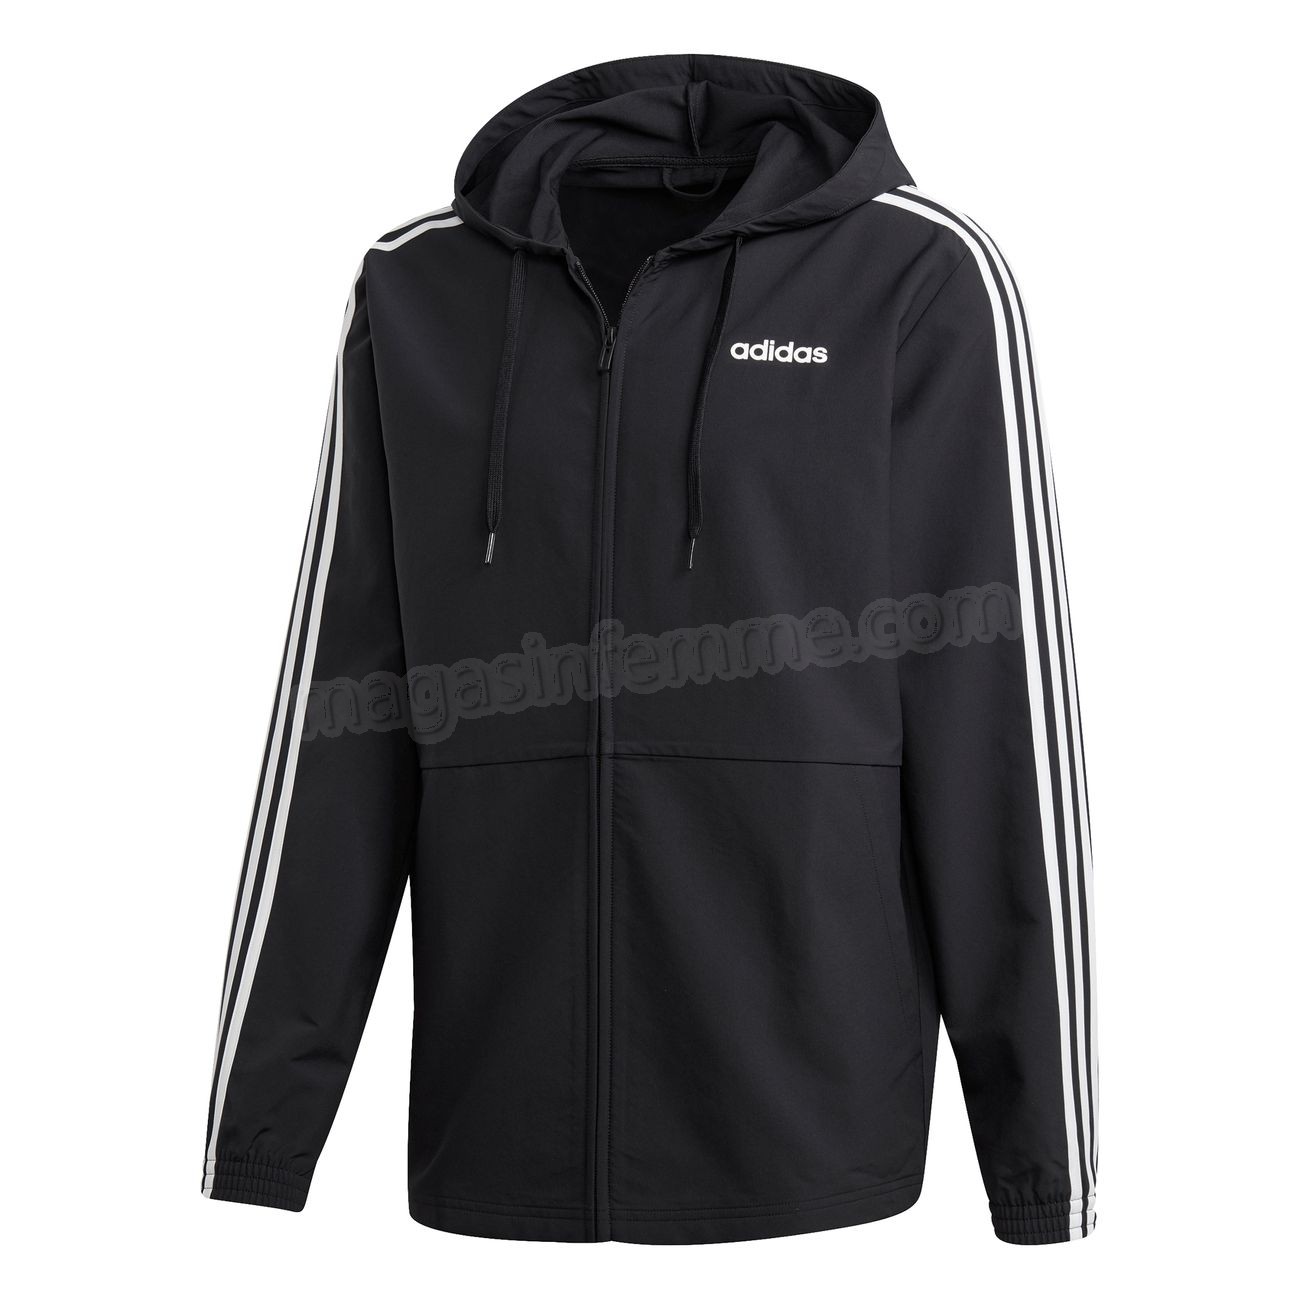 Adidas-Fitness homme ADIDAS Coupe-vent adidas Essentials 3-bandes Woven en solde - Adidas-Fitness homme ADIDAS Coupe-vent adidas Essentials 3-bandes Woven en solde